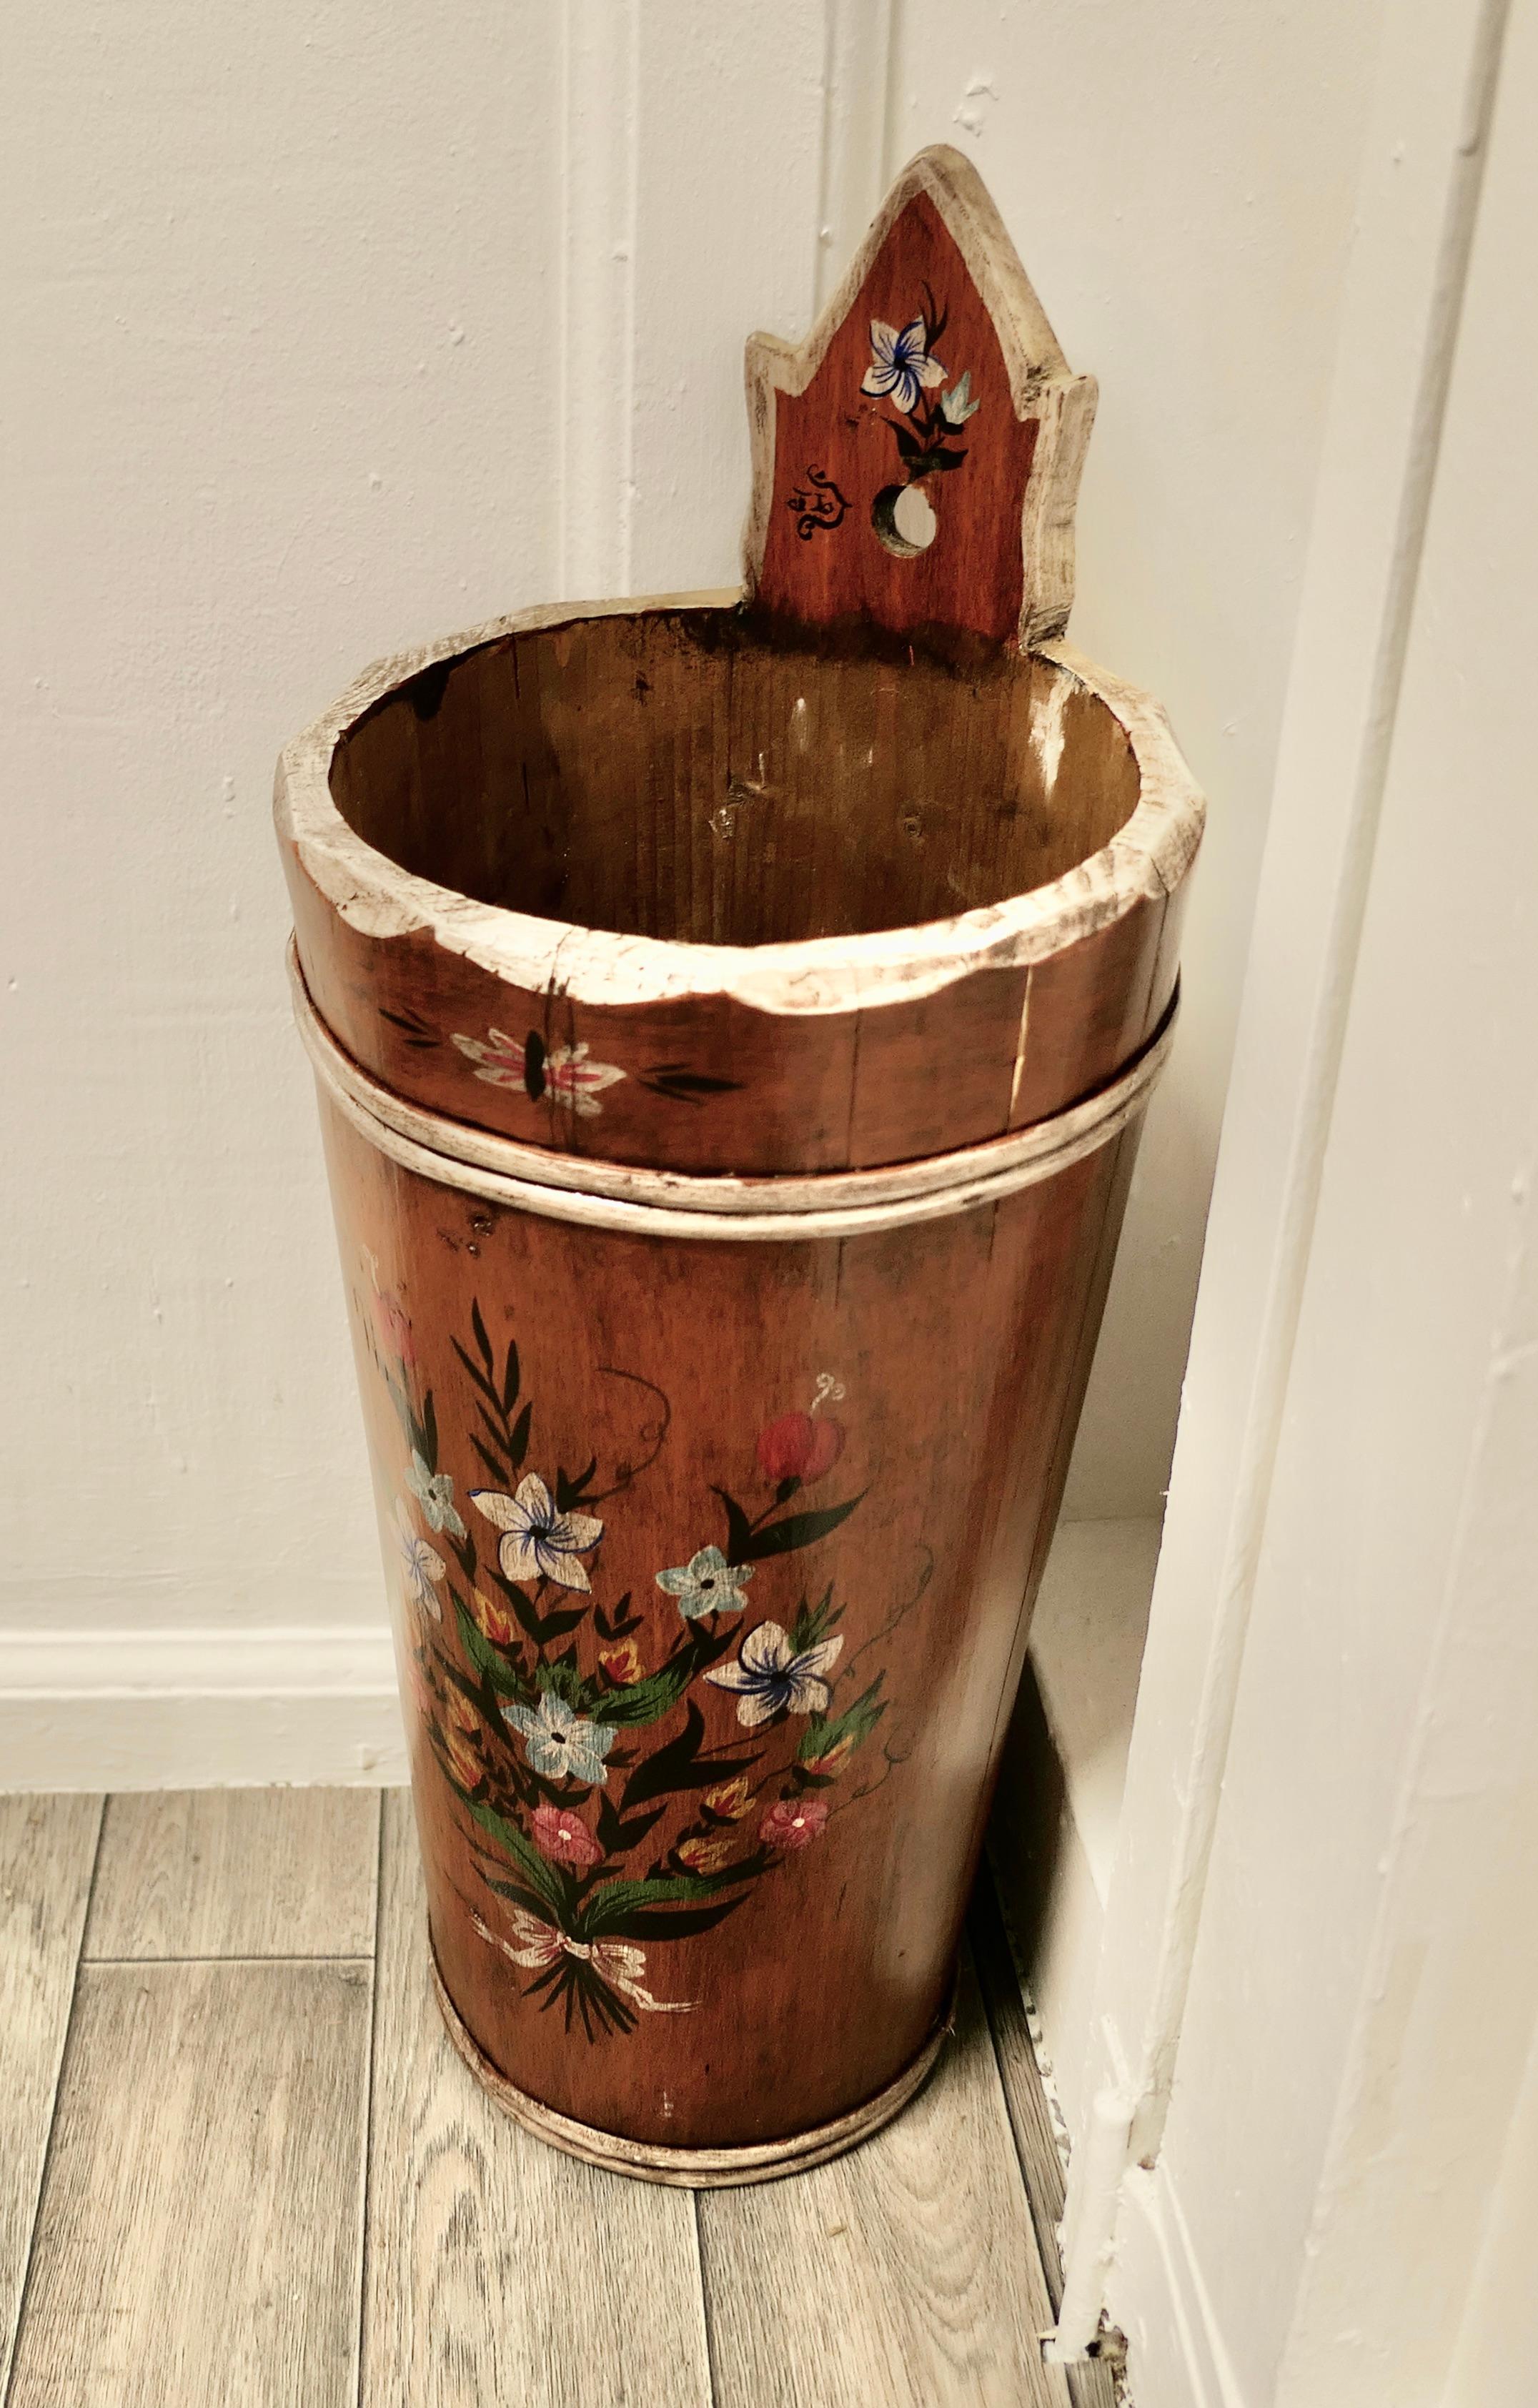 Bavarian Folk art painted stick stand, umbrella stand

This good looking piece it is conical in shape and decorated with flowers, the artist has signed this piece “J L”
The stand is made in pine and has a hole by which it could be fixed to the